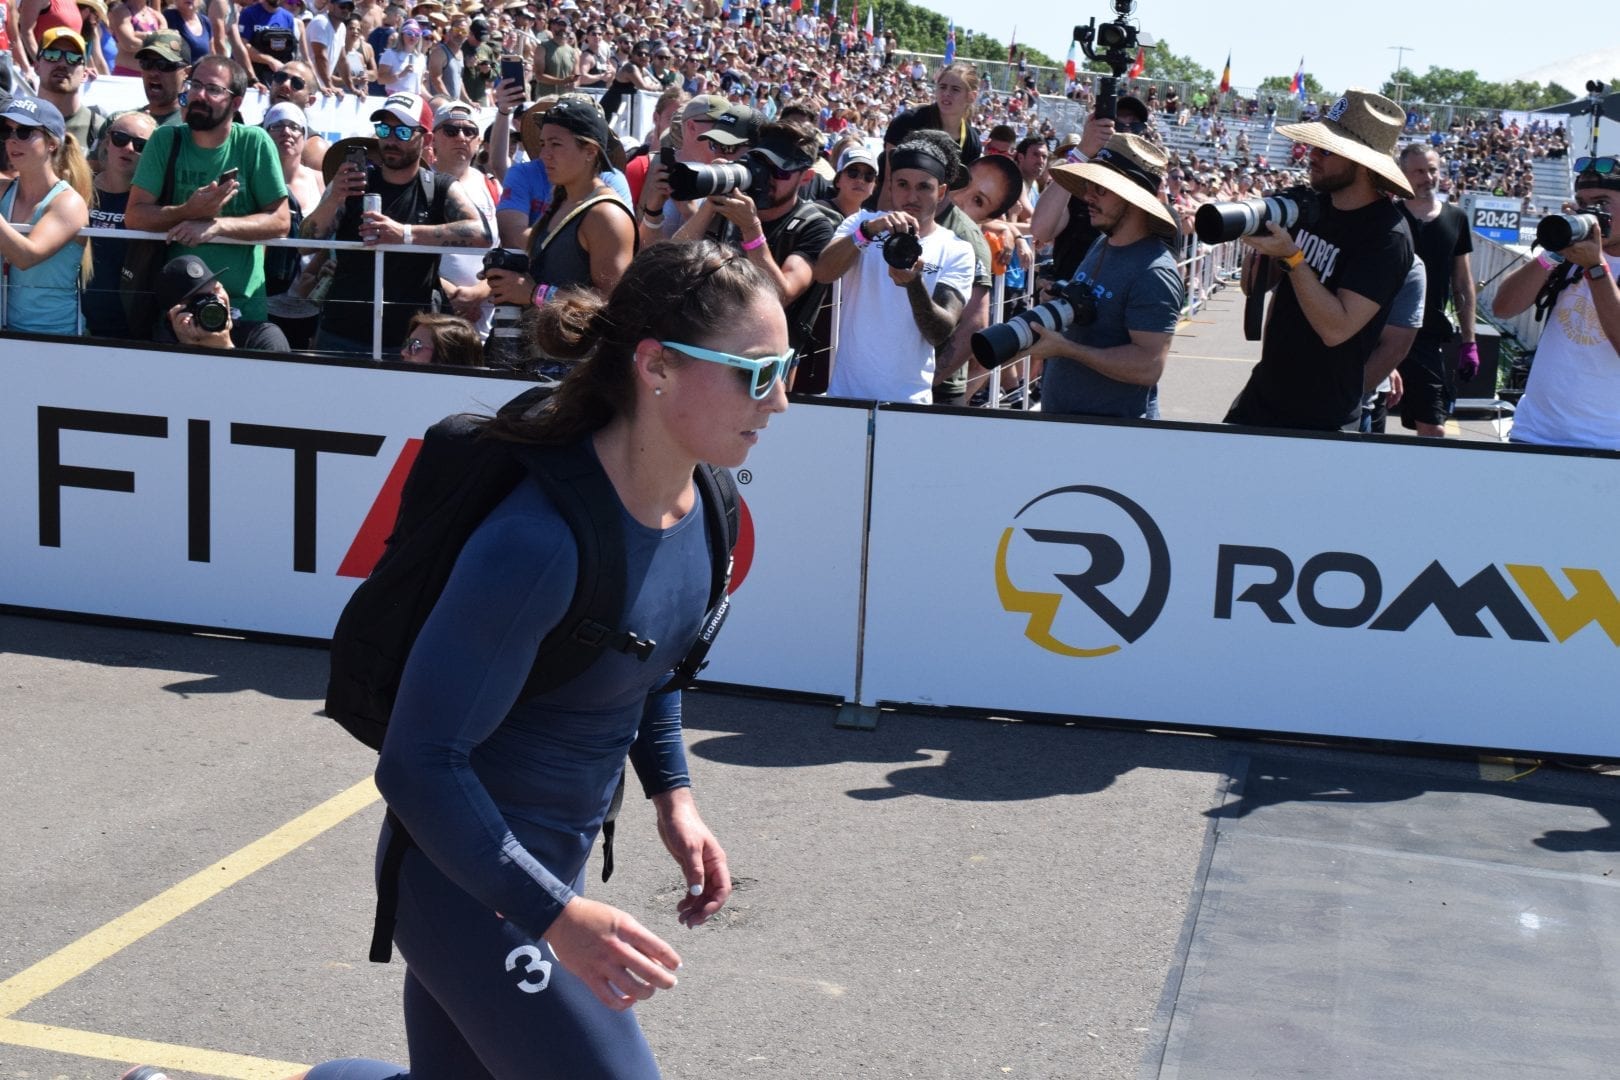 Bethany Shadburne completes the Ruck Run event at the 2019 CrossFit Games.